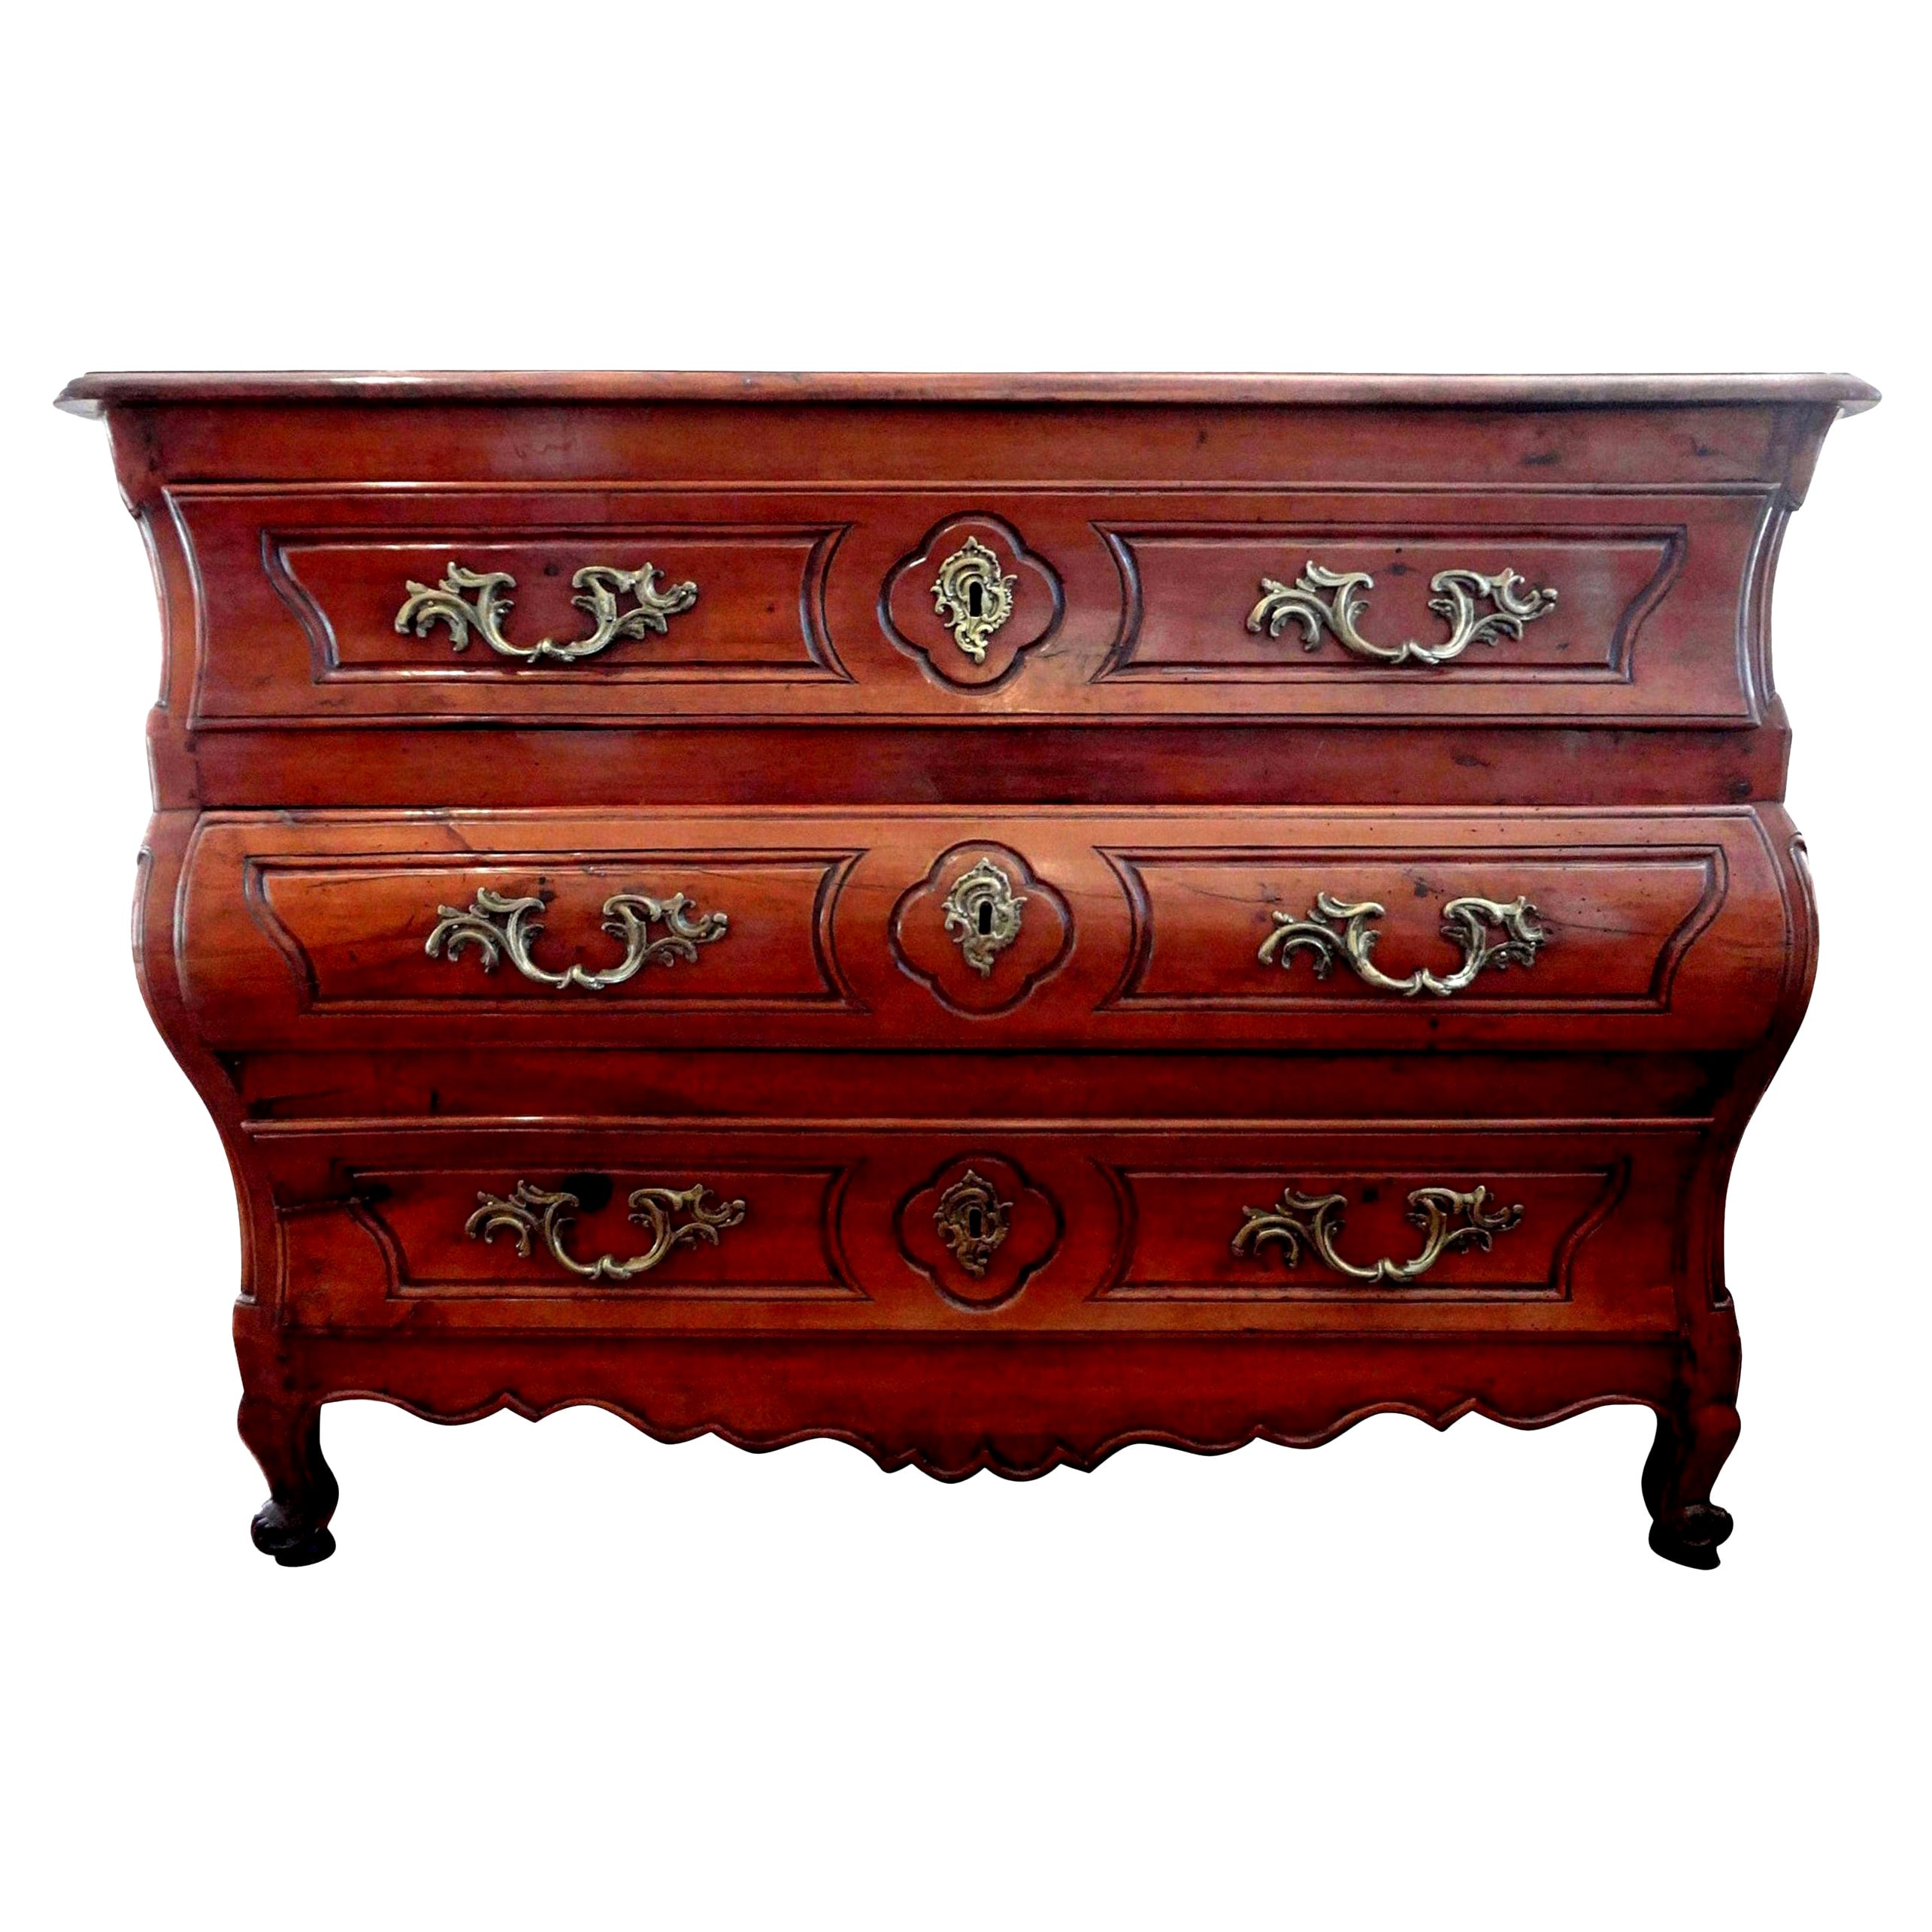 Period 18th Century French Louis XV Commode, Bordelaise For Sale